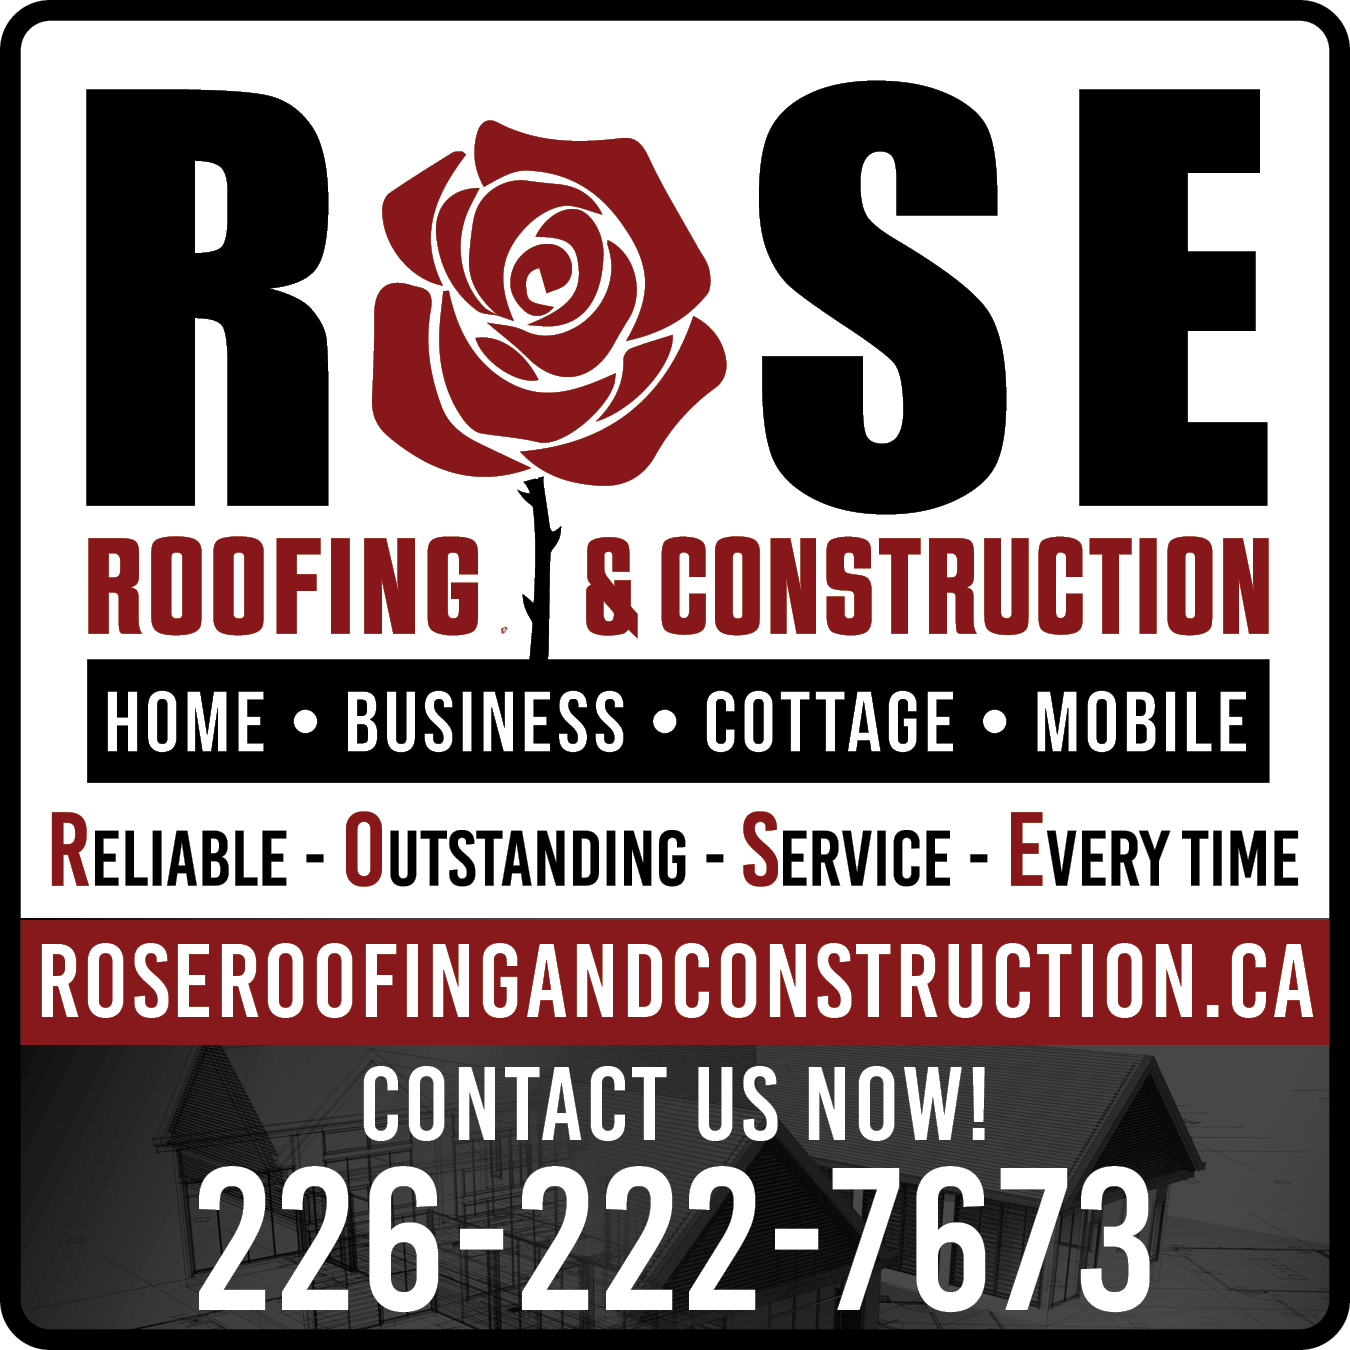 Rose Roofing & Construction